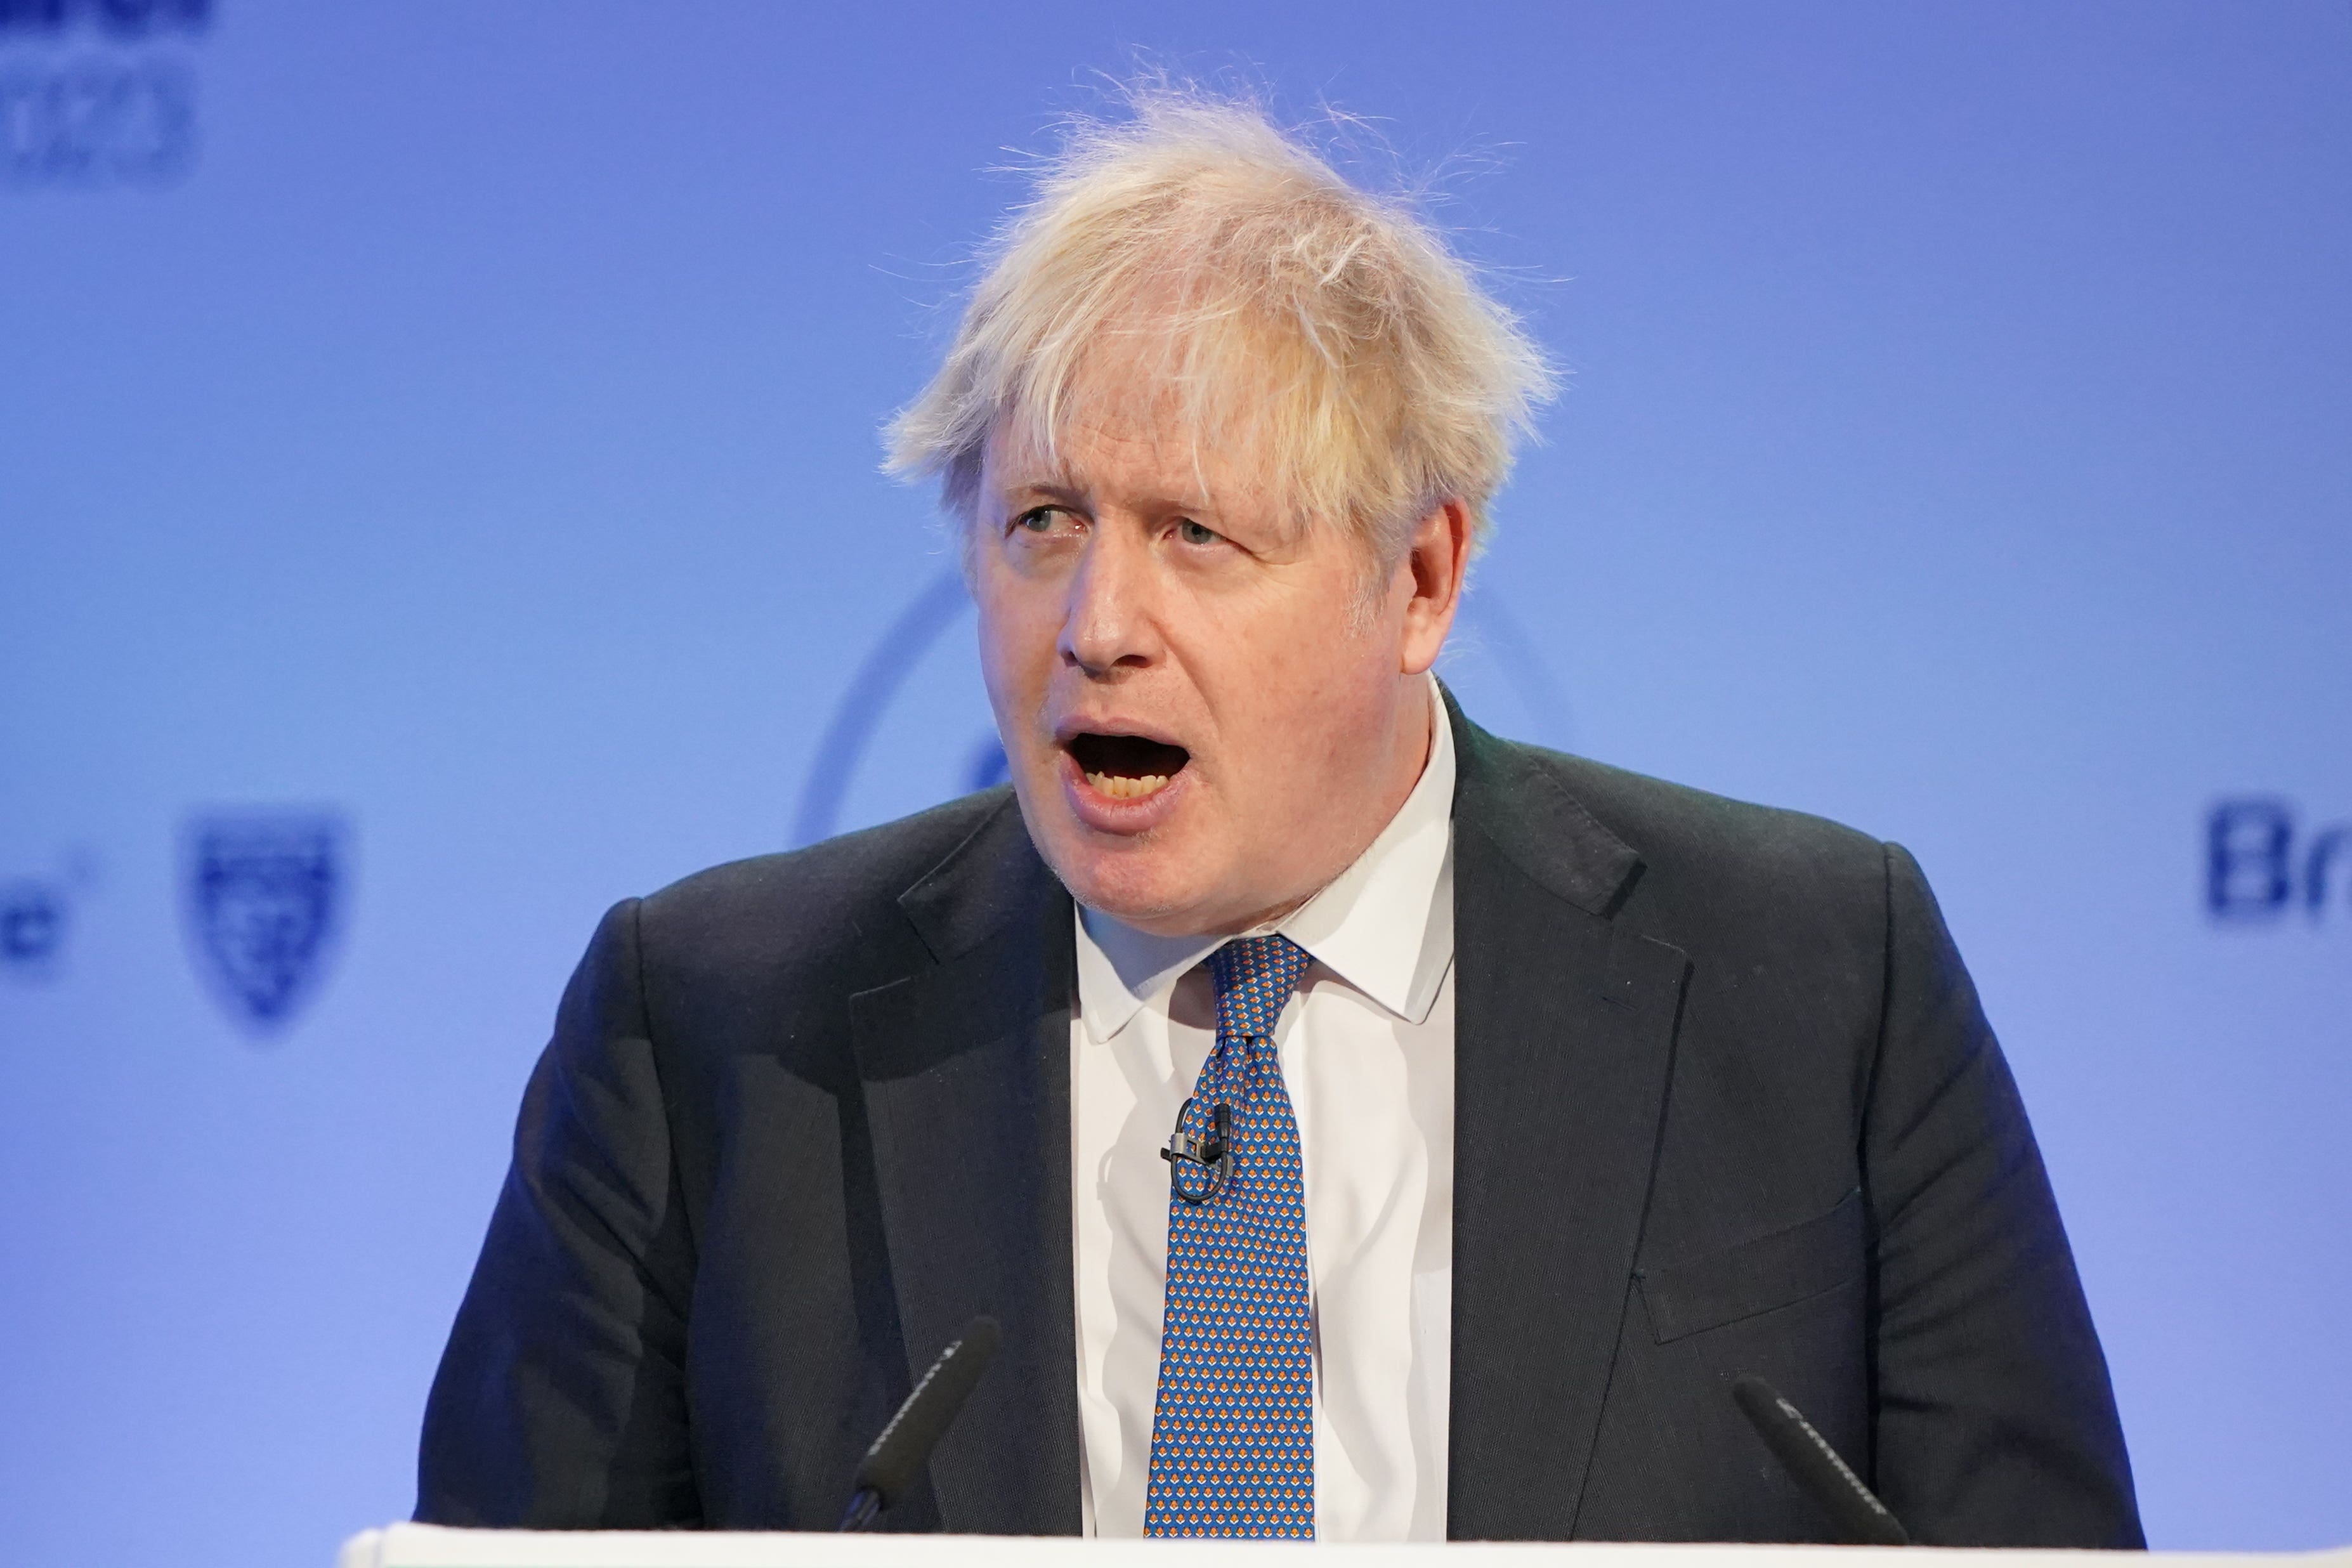 Boris Johnson will face MPs on Wednesday as they investigate whether he misled parliament